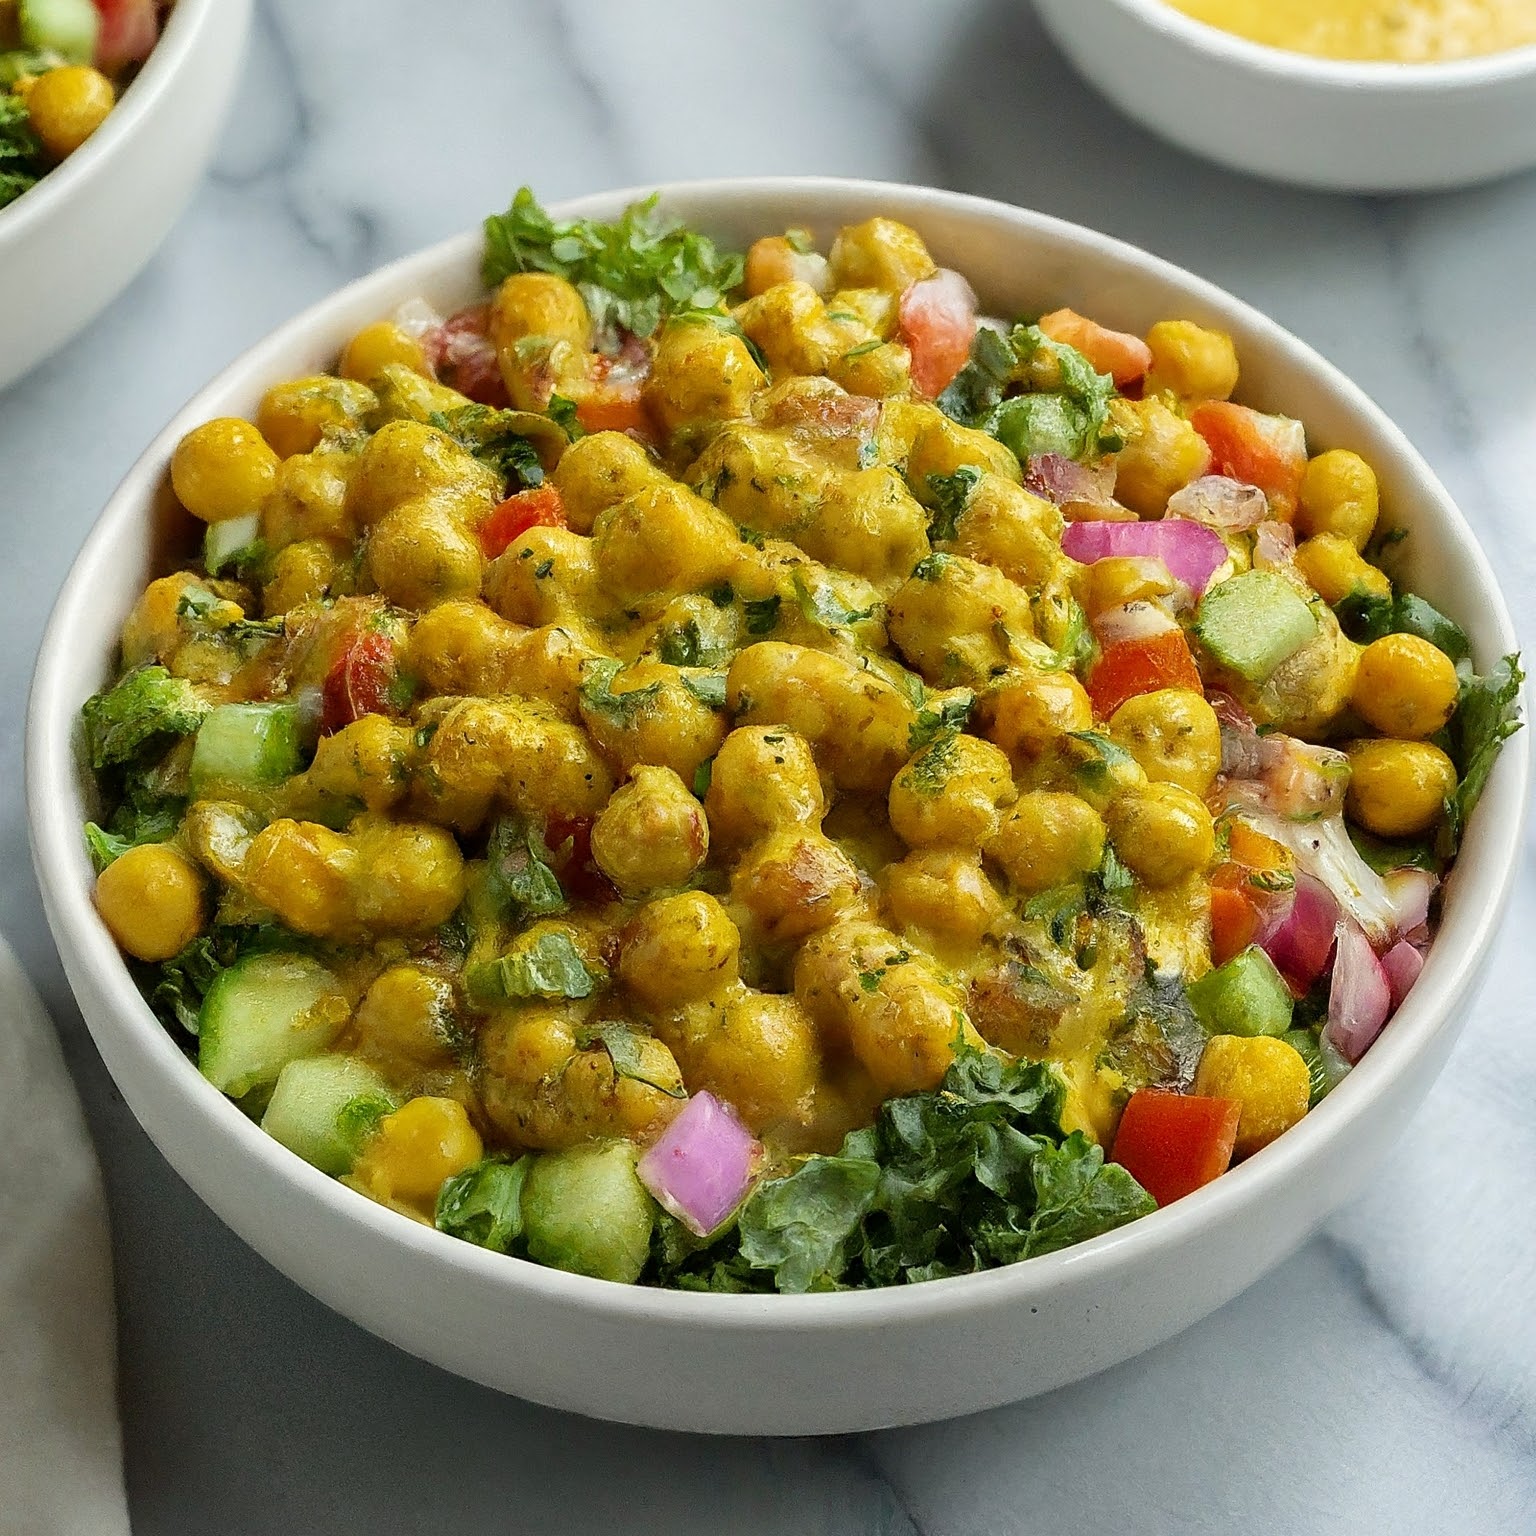 Bowl of curried chickpea salad with golden chickpeas, chopped vegetables, herbs, and creamy dressing.